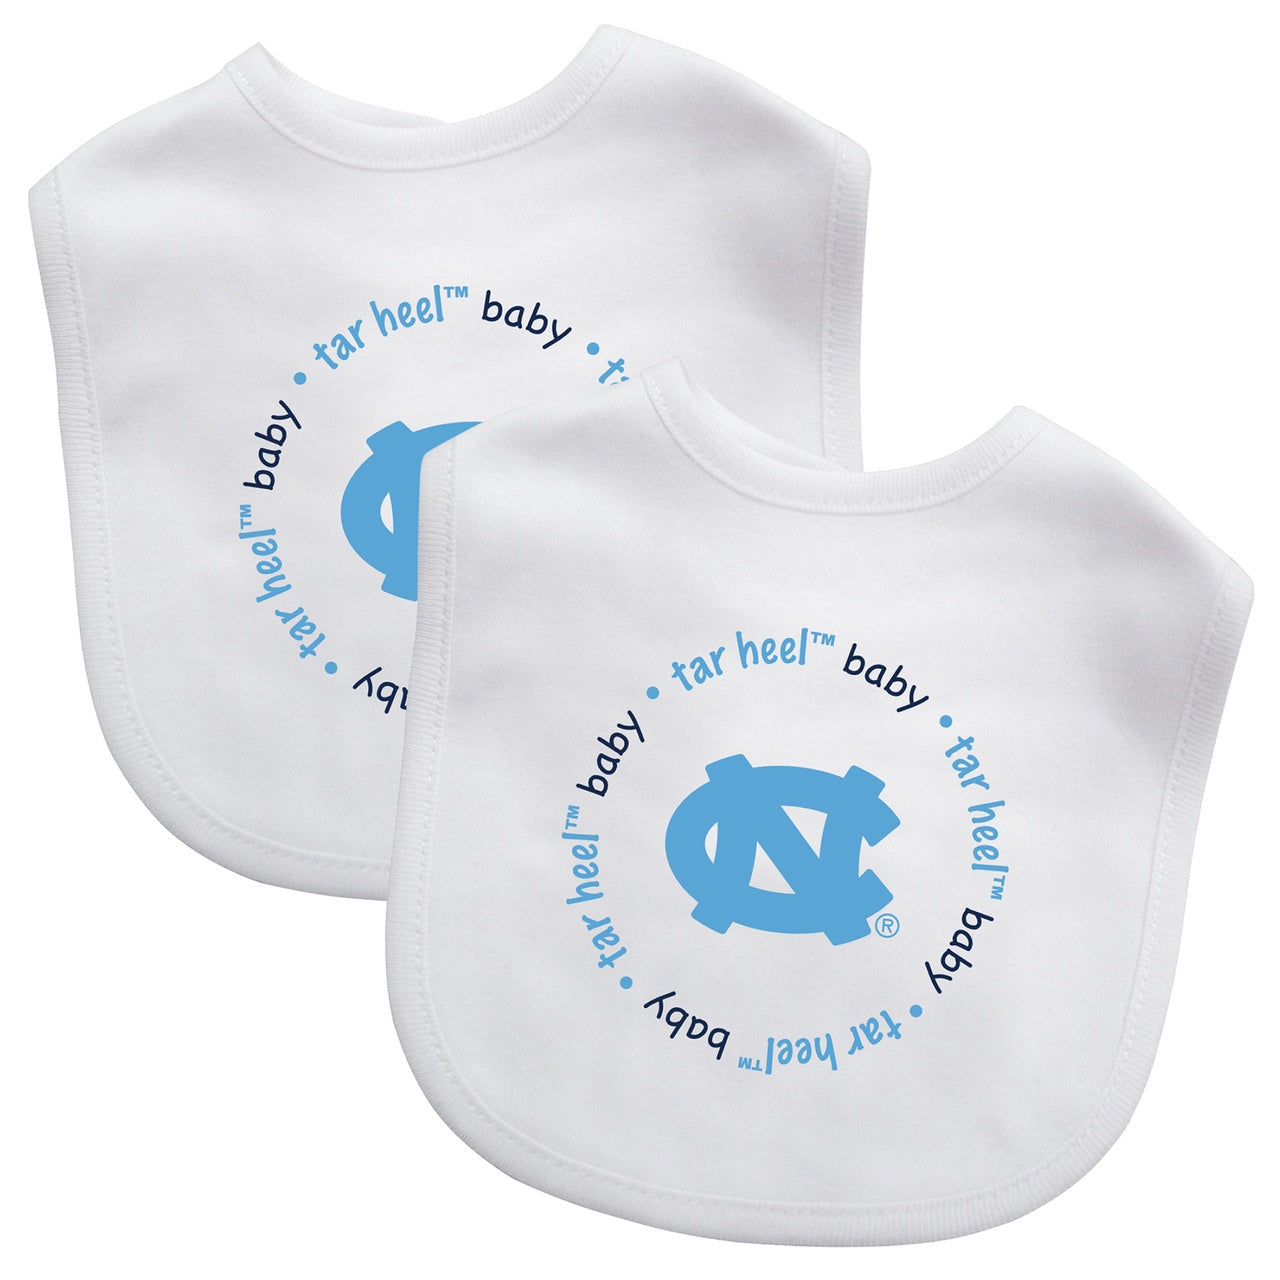 North Carolina Baby Bibs 2-Pack from Masterpieces Officially Licensed